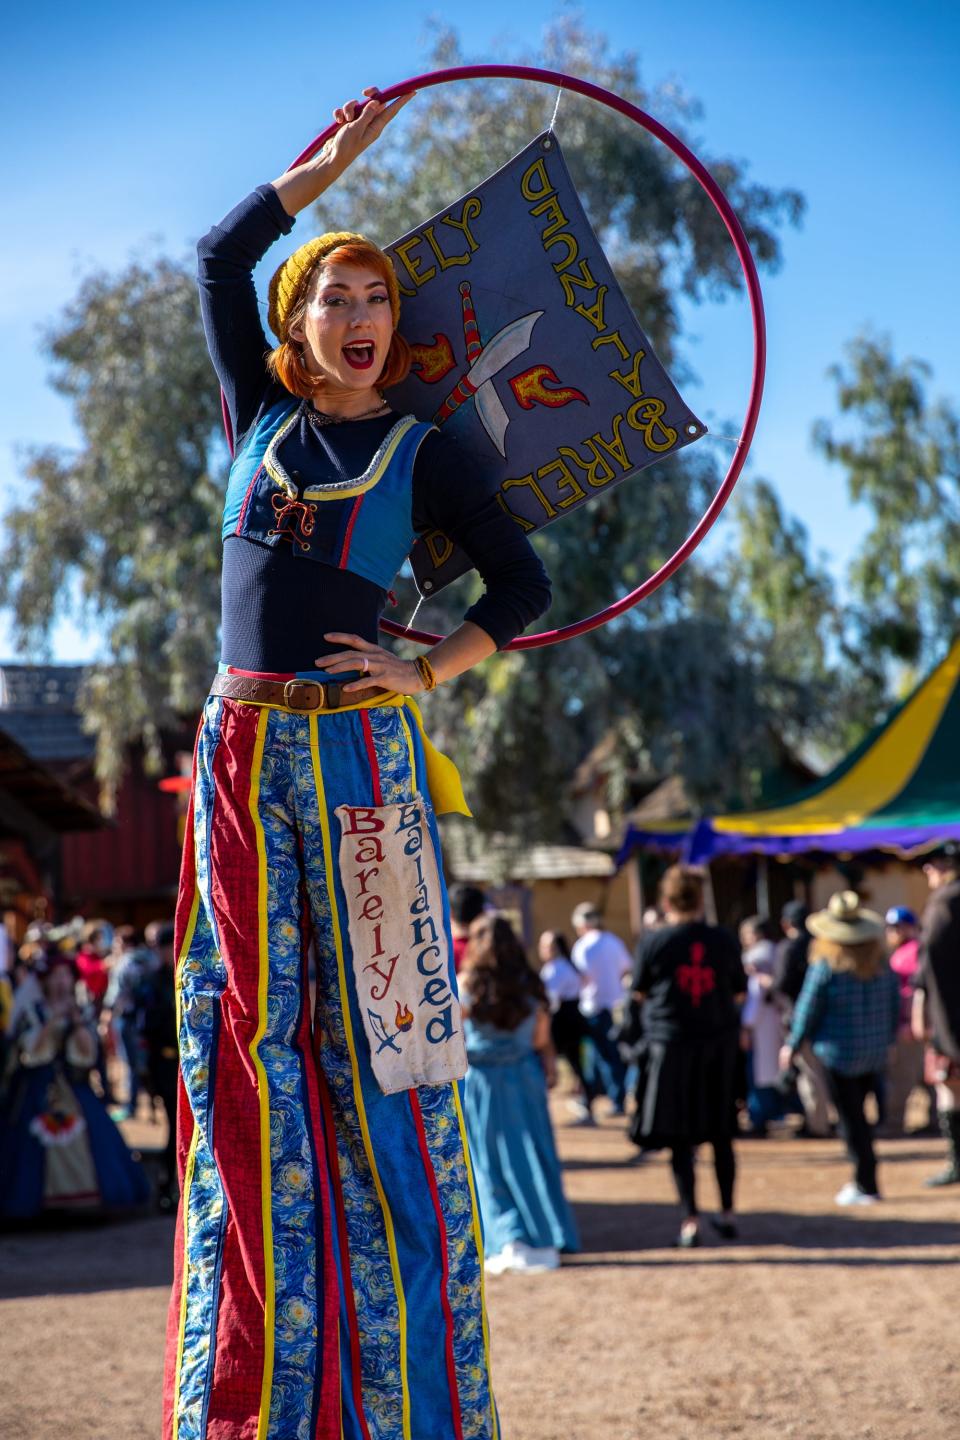 A cast member at the Renaissance Festival in Gold Canyon on Feb. 18, 2023.